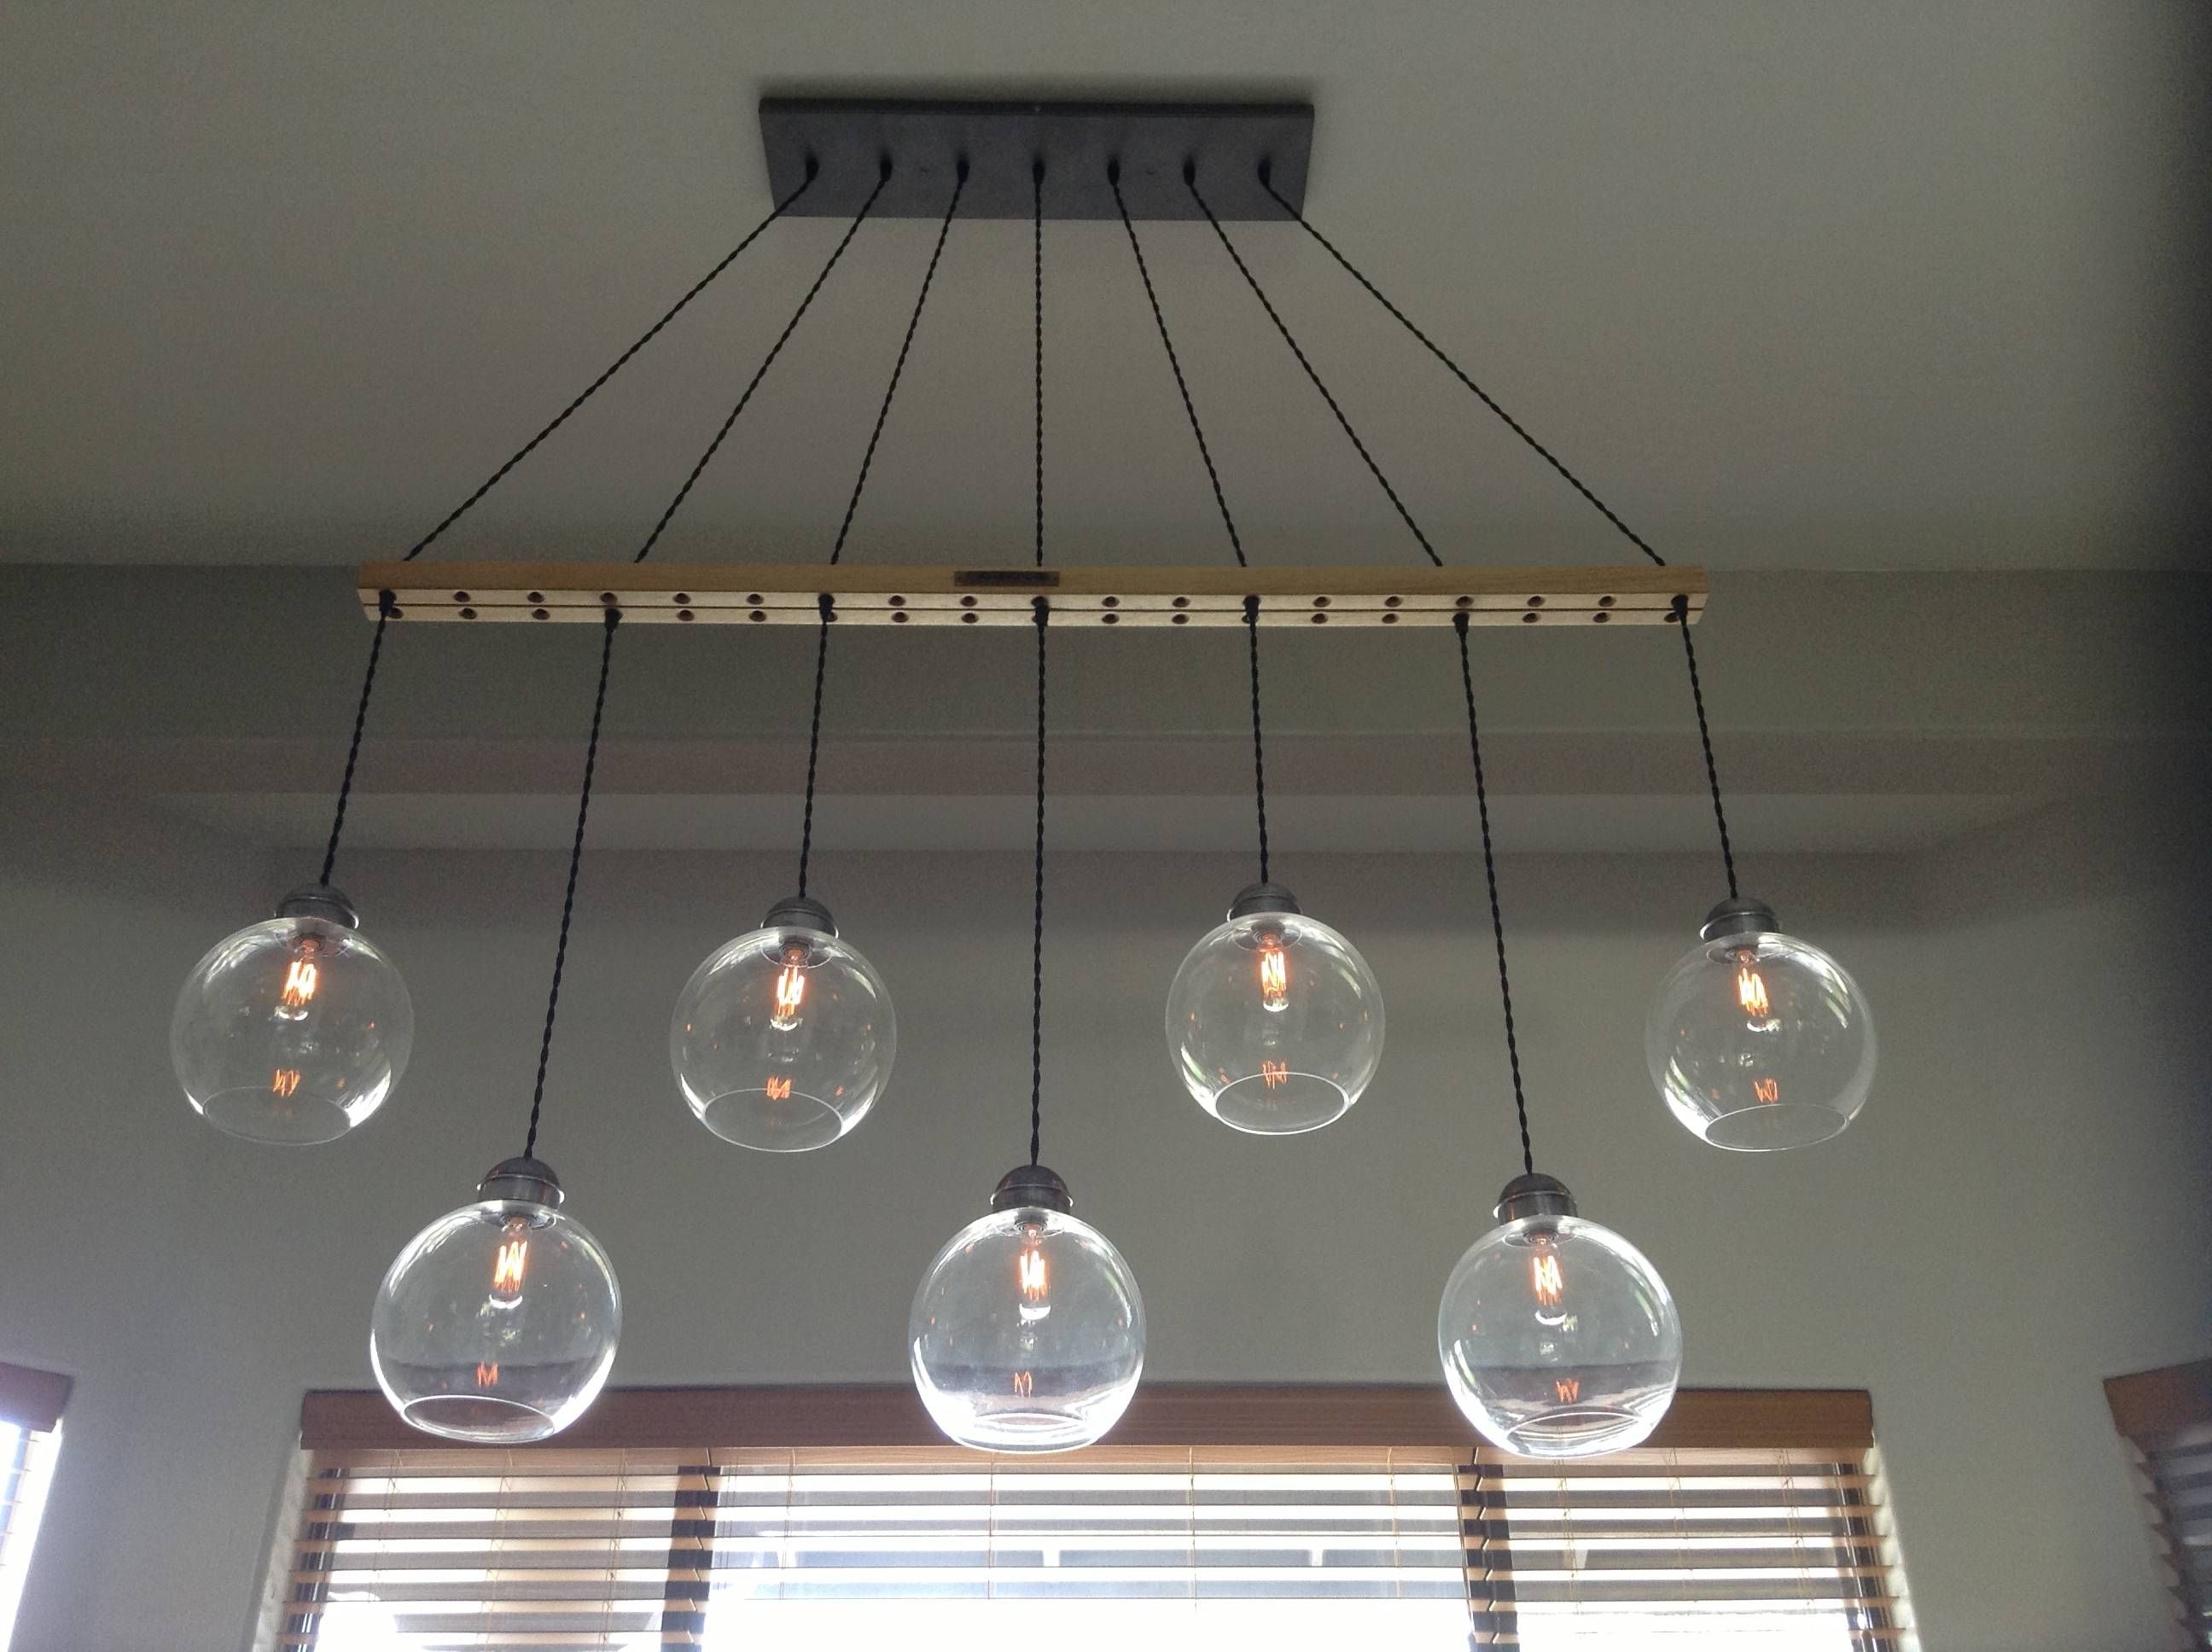 Fresh Cool Diy Lighting Ideas #11311 Within Homemade Pendant Lights (View 4 of 15)